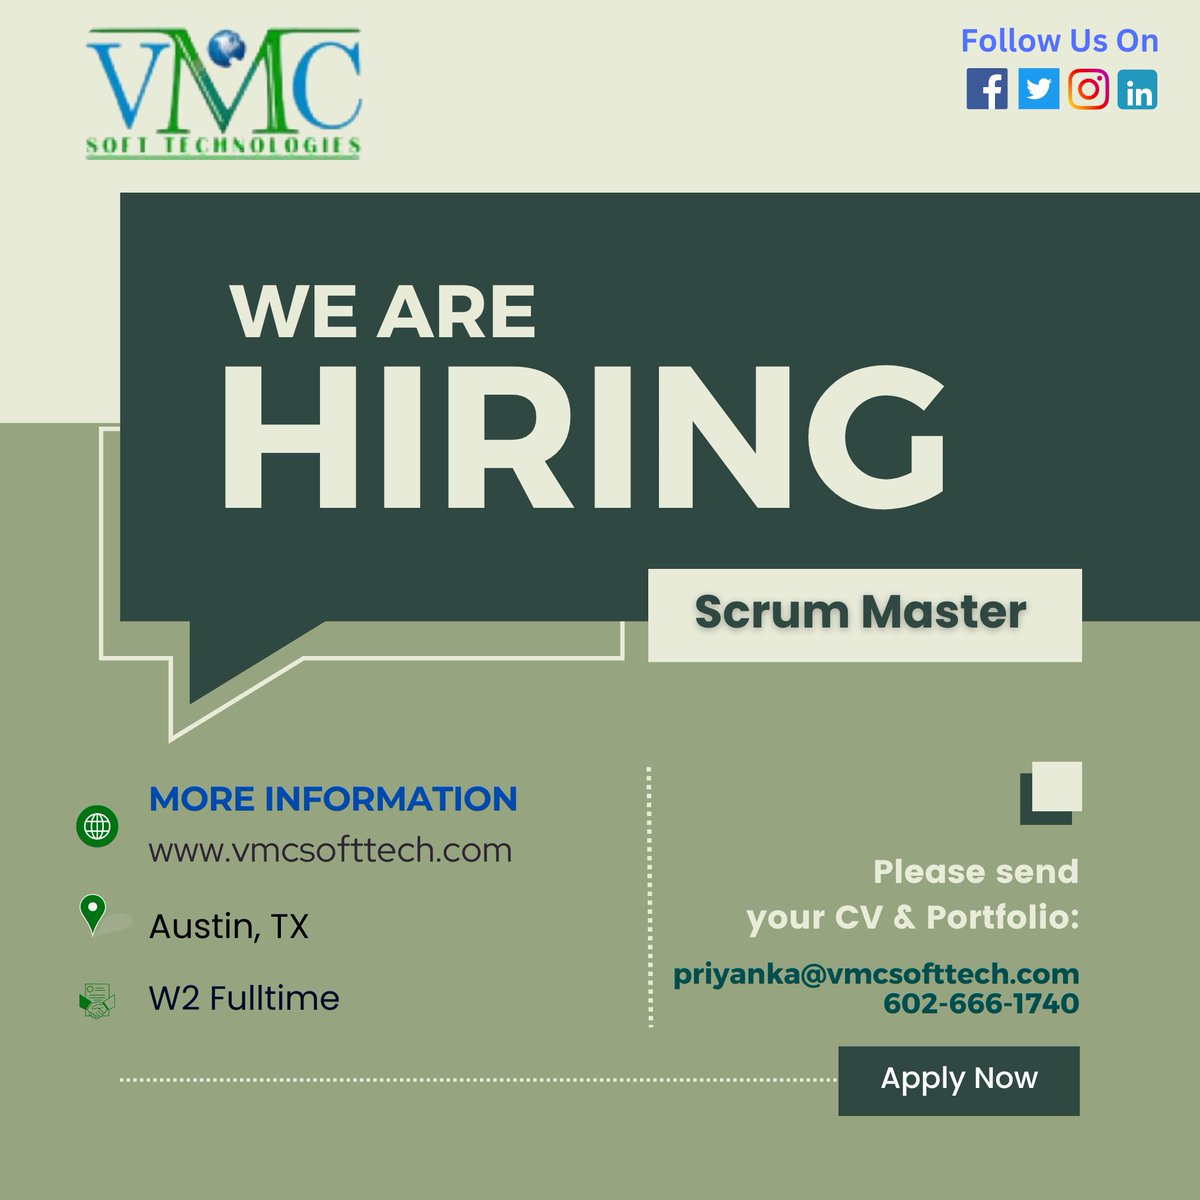 VMC Soft Technologies looking for a Scrum Master in Austin,TX Job Title: Scrum Master Locations: Austin,TX Contract: W2 Full-Time For more details: priyanka@vmcsofttech.com/ 602-666-1740 #scrummaster #scrum #agile #agilecoach #productowner #kanban #projectmanagement